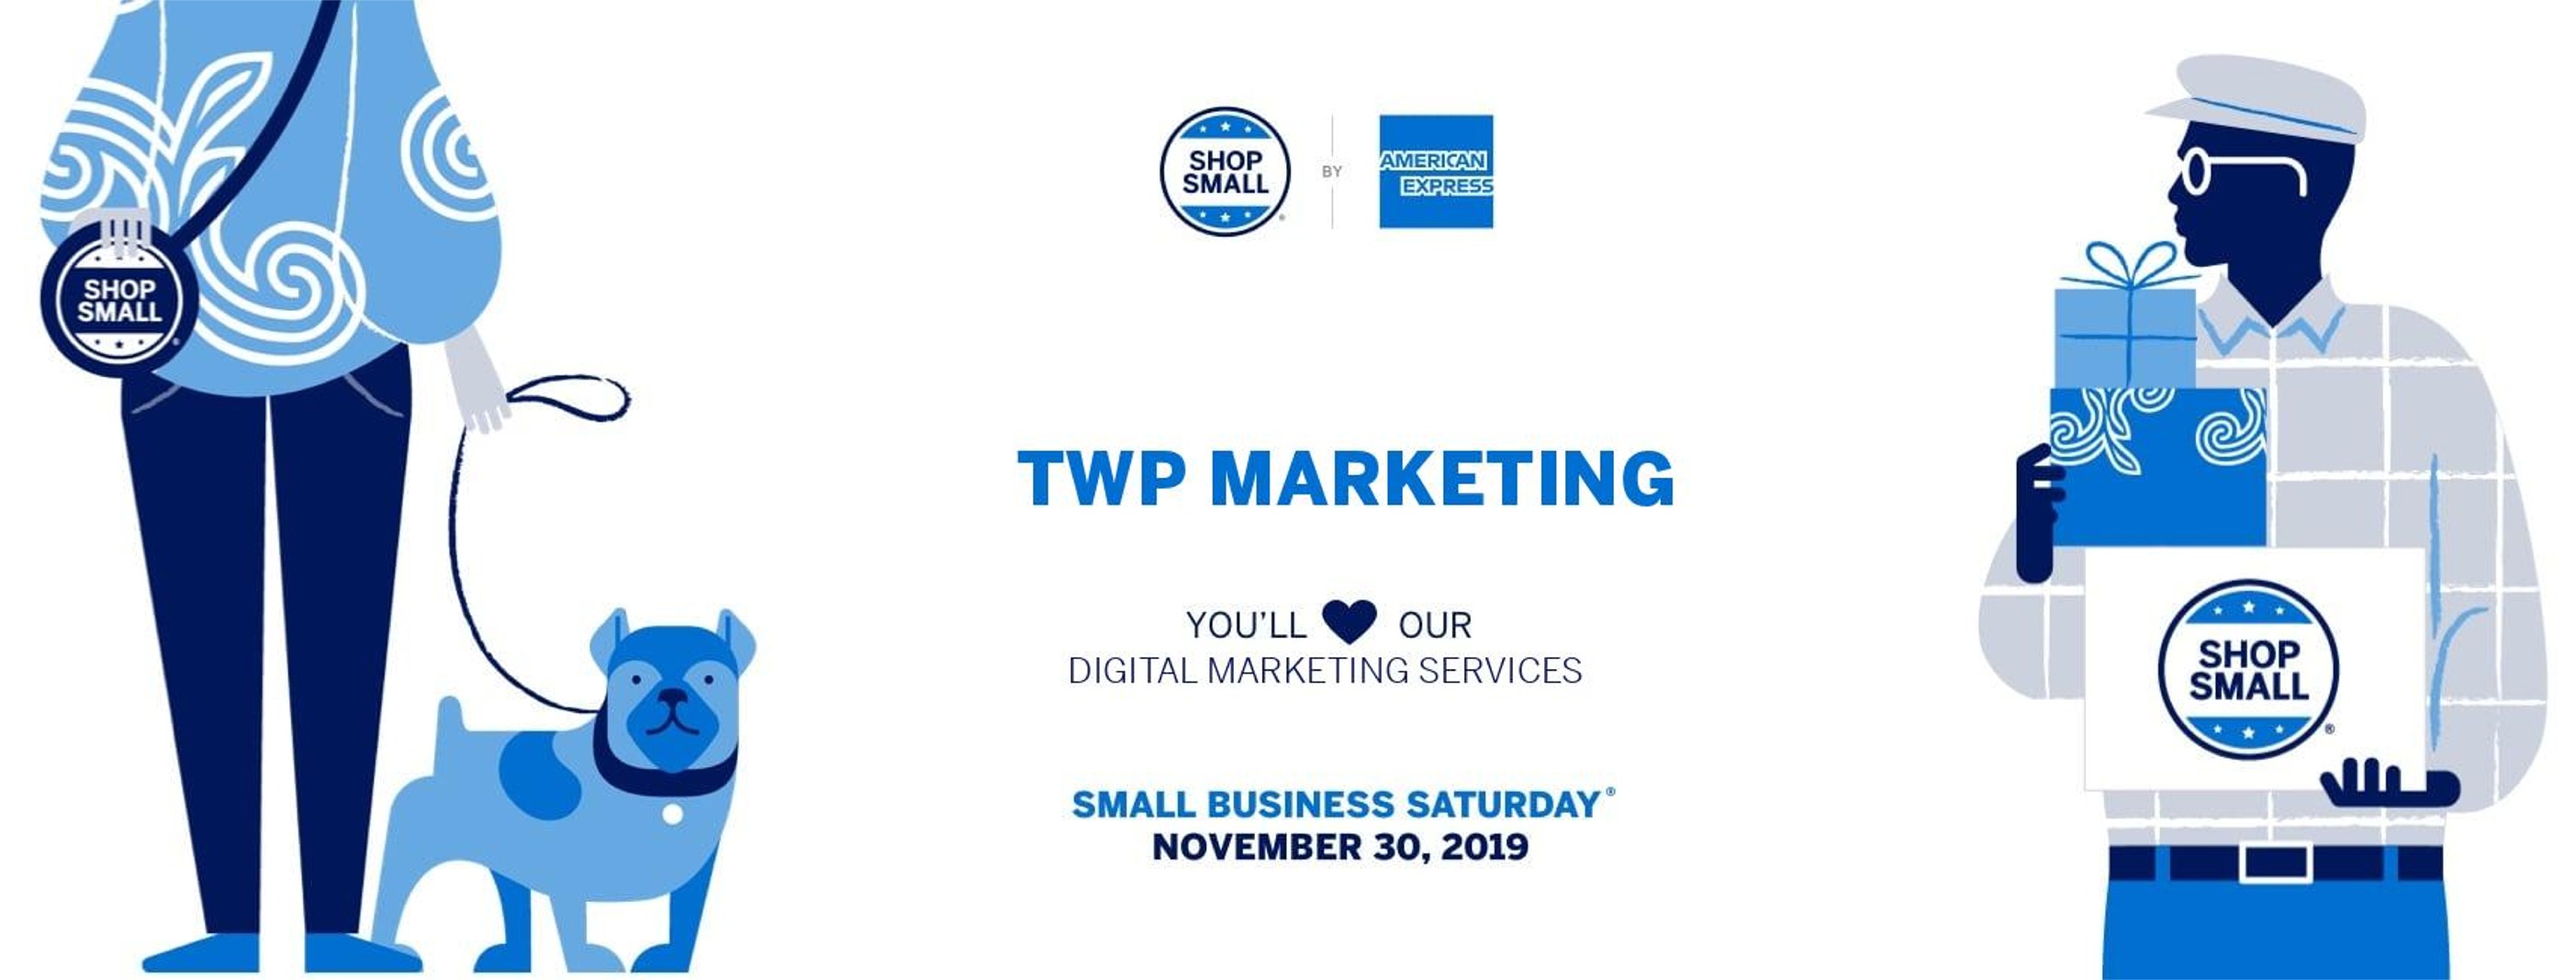 Small Business Saturday Home Facebook